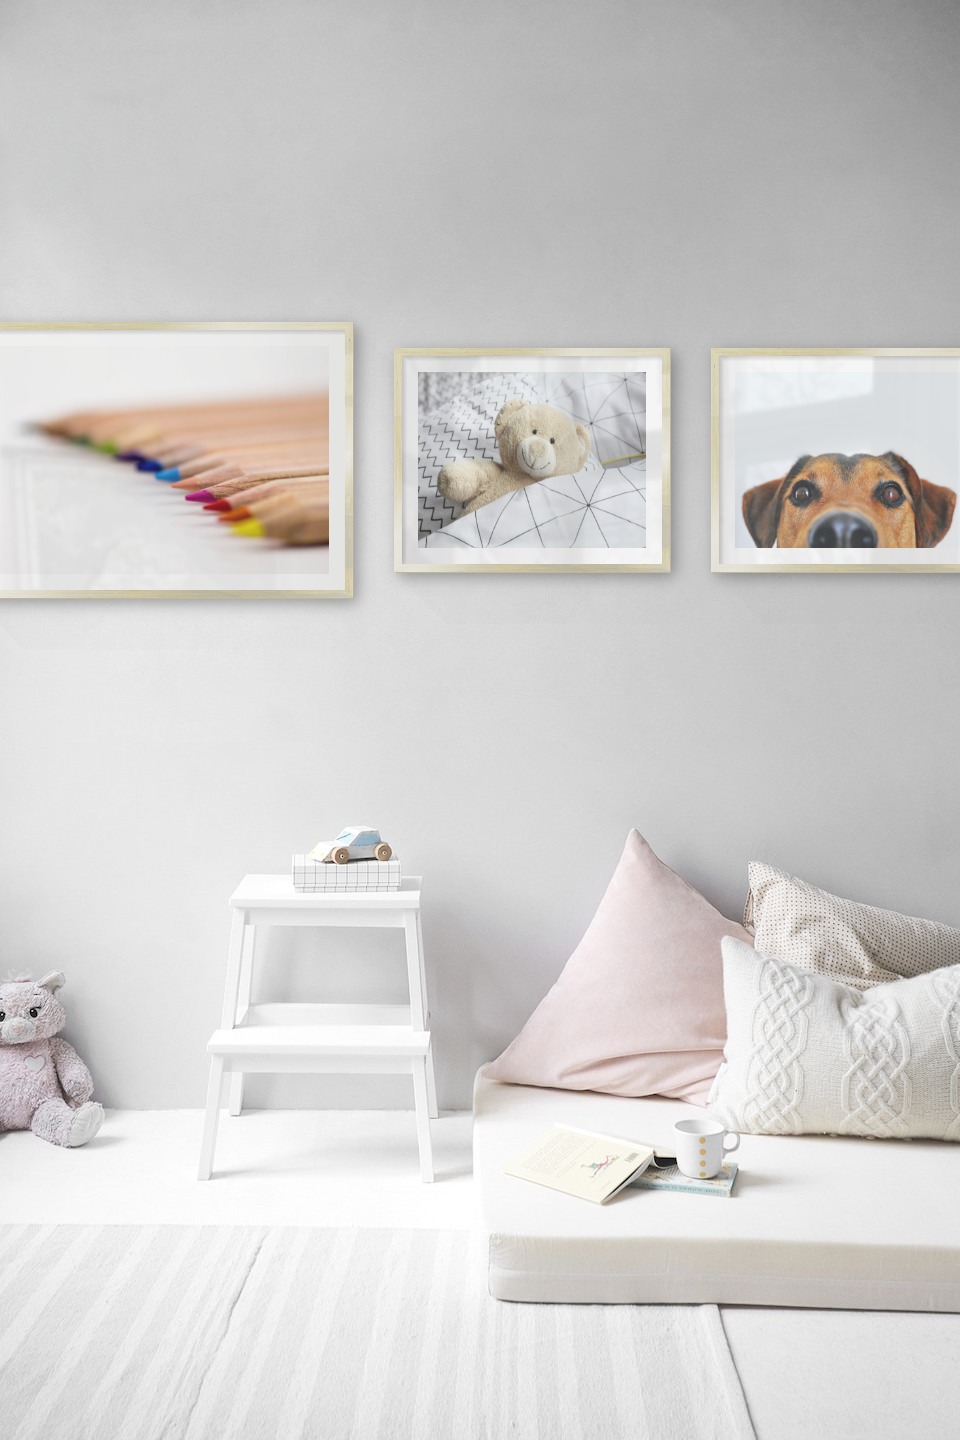 Gallery wall with picture frames in gold in sizes 50x70 and 40x50 with prints "Pencils in different colors", "Teddy bear in bed" and "Hundnos"